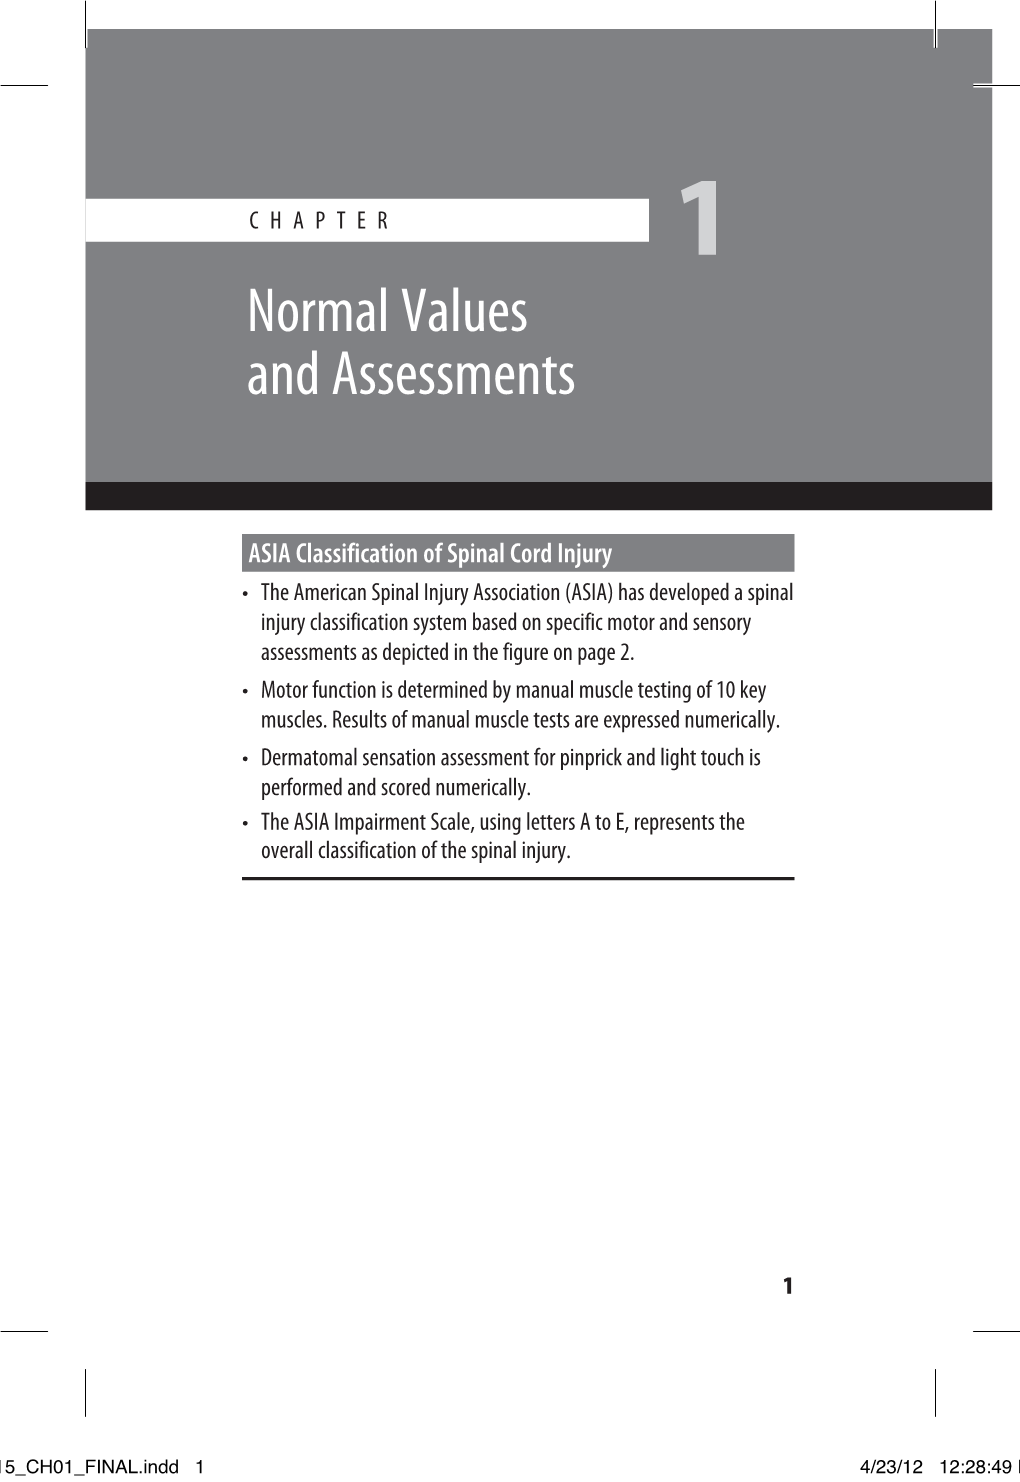 Normal Values and Assessments